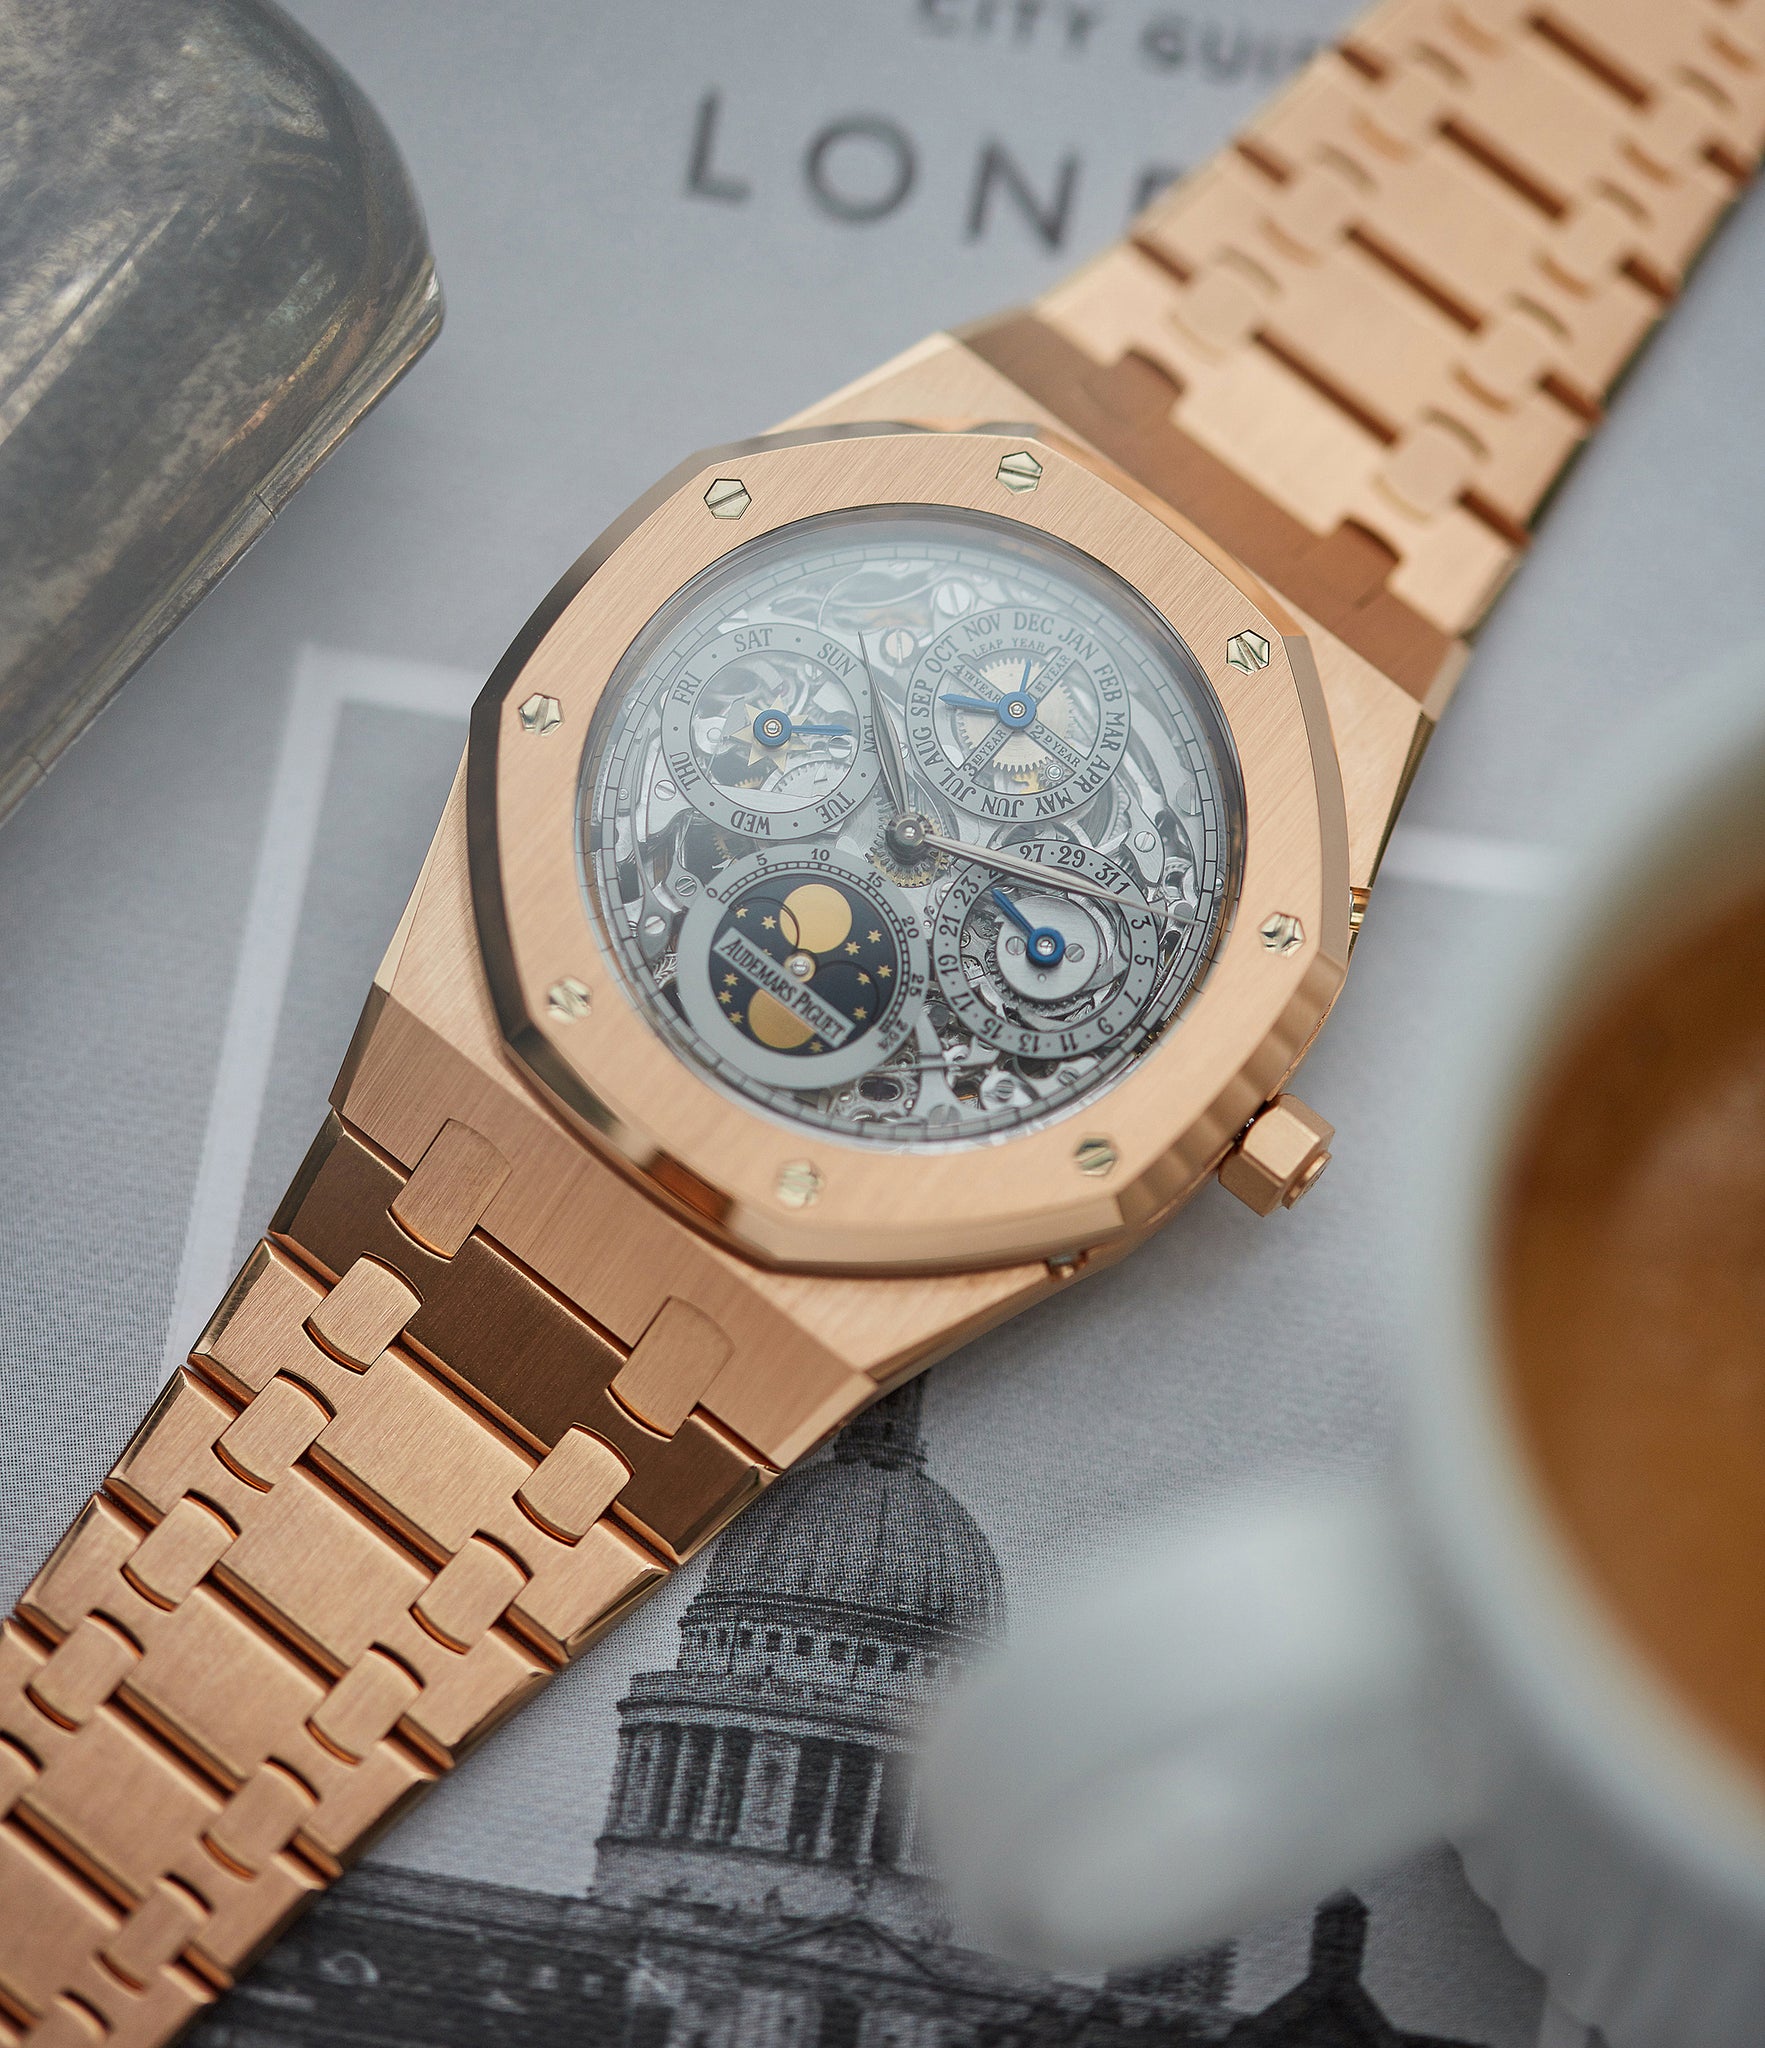 rare Audemars Piguet Royal Oak Quantieme Perpetual Calendar 25829OR rose gold skeletonised pre-owned sport watch for sale online at A Collected Man London UK specialist of rare watches